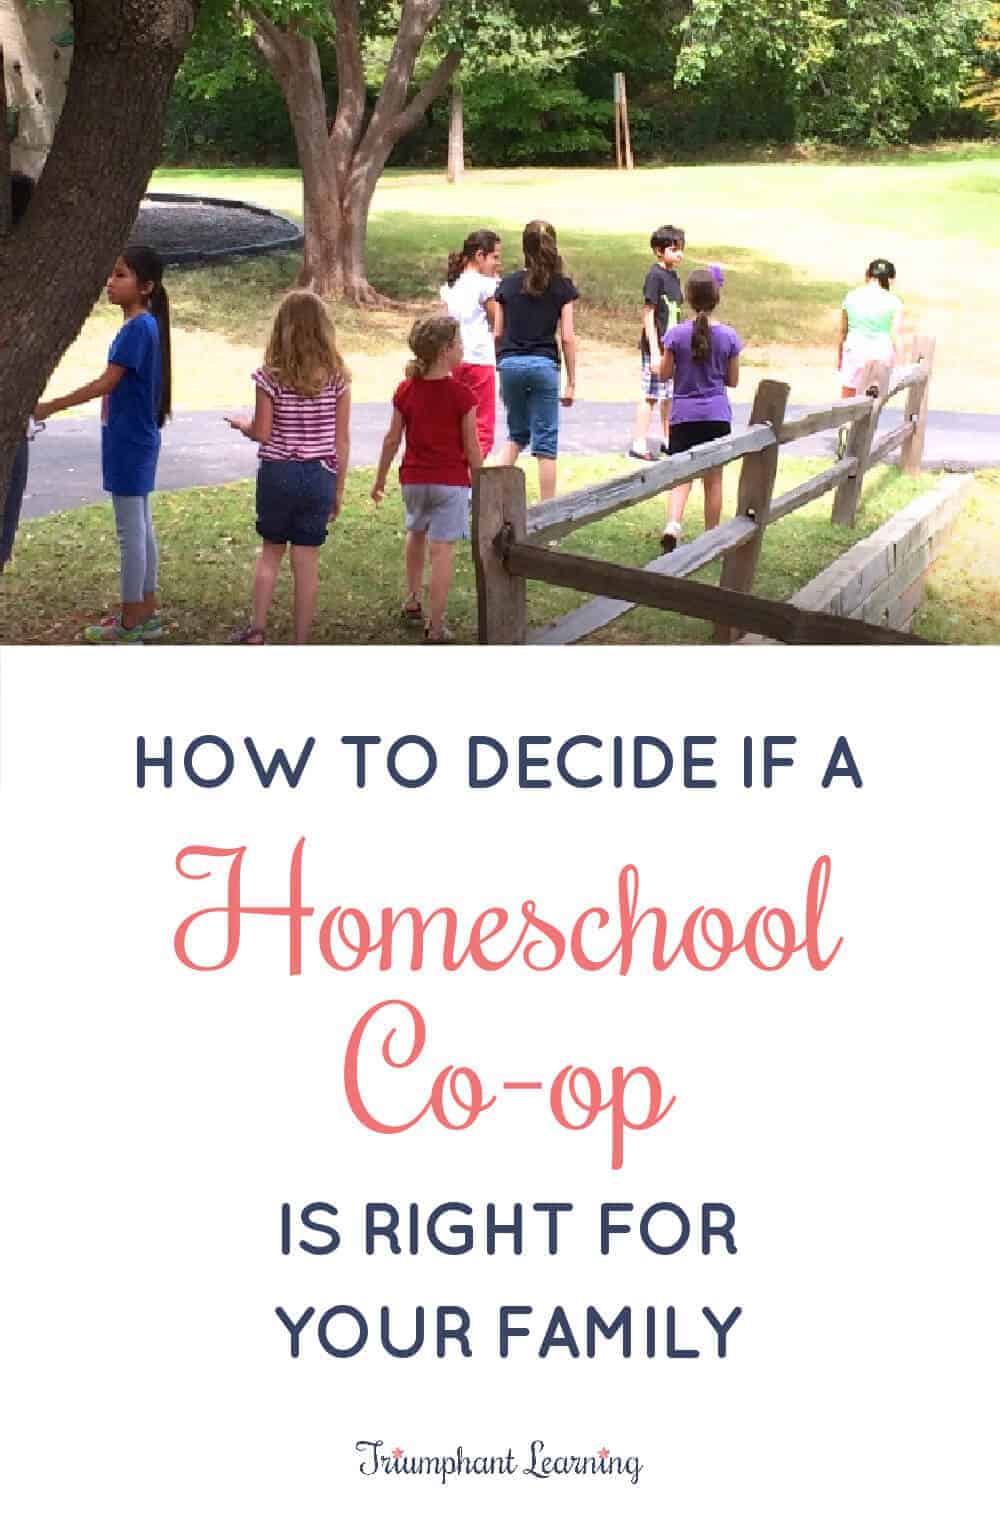 Is a homeschool co-op a good fit for your family? Co-ops are a great option for many families, but they're not a good fit for every family. Learn the pros and cons of co-ops, different types of co-ops, and how to decide if one is right for your family. via @TriLearning